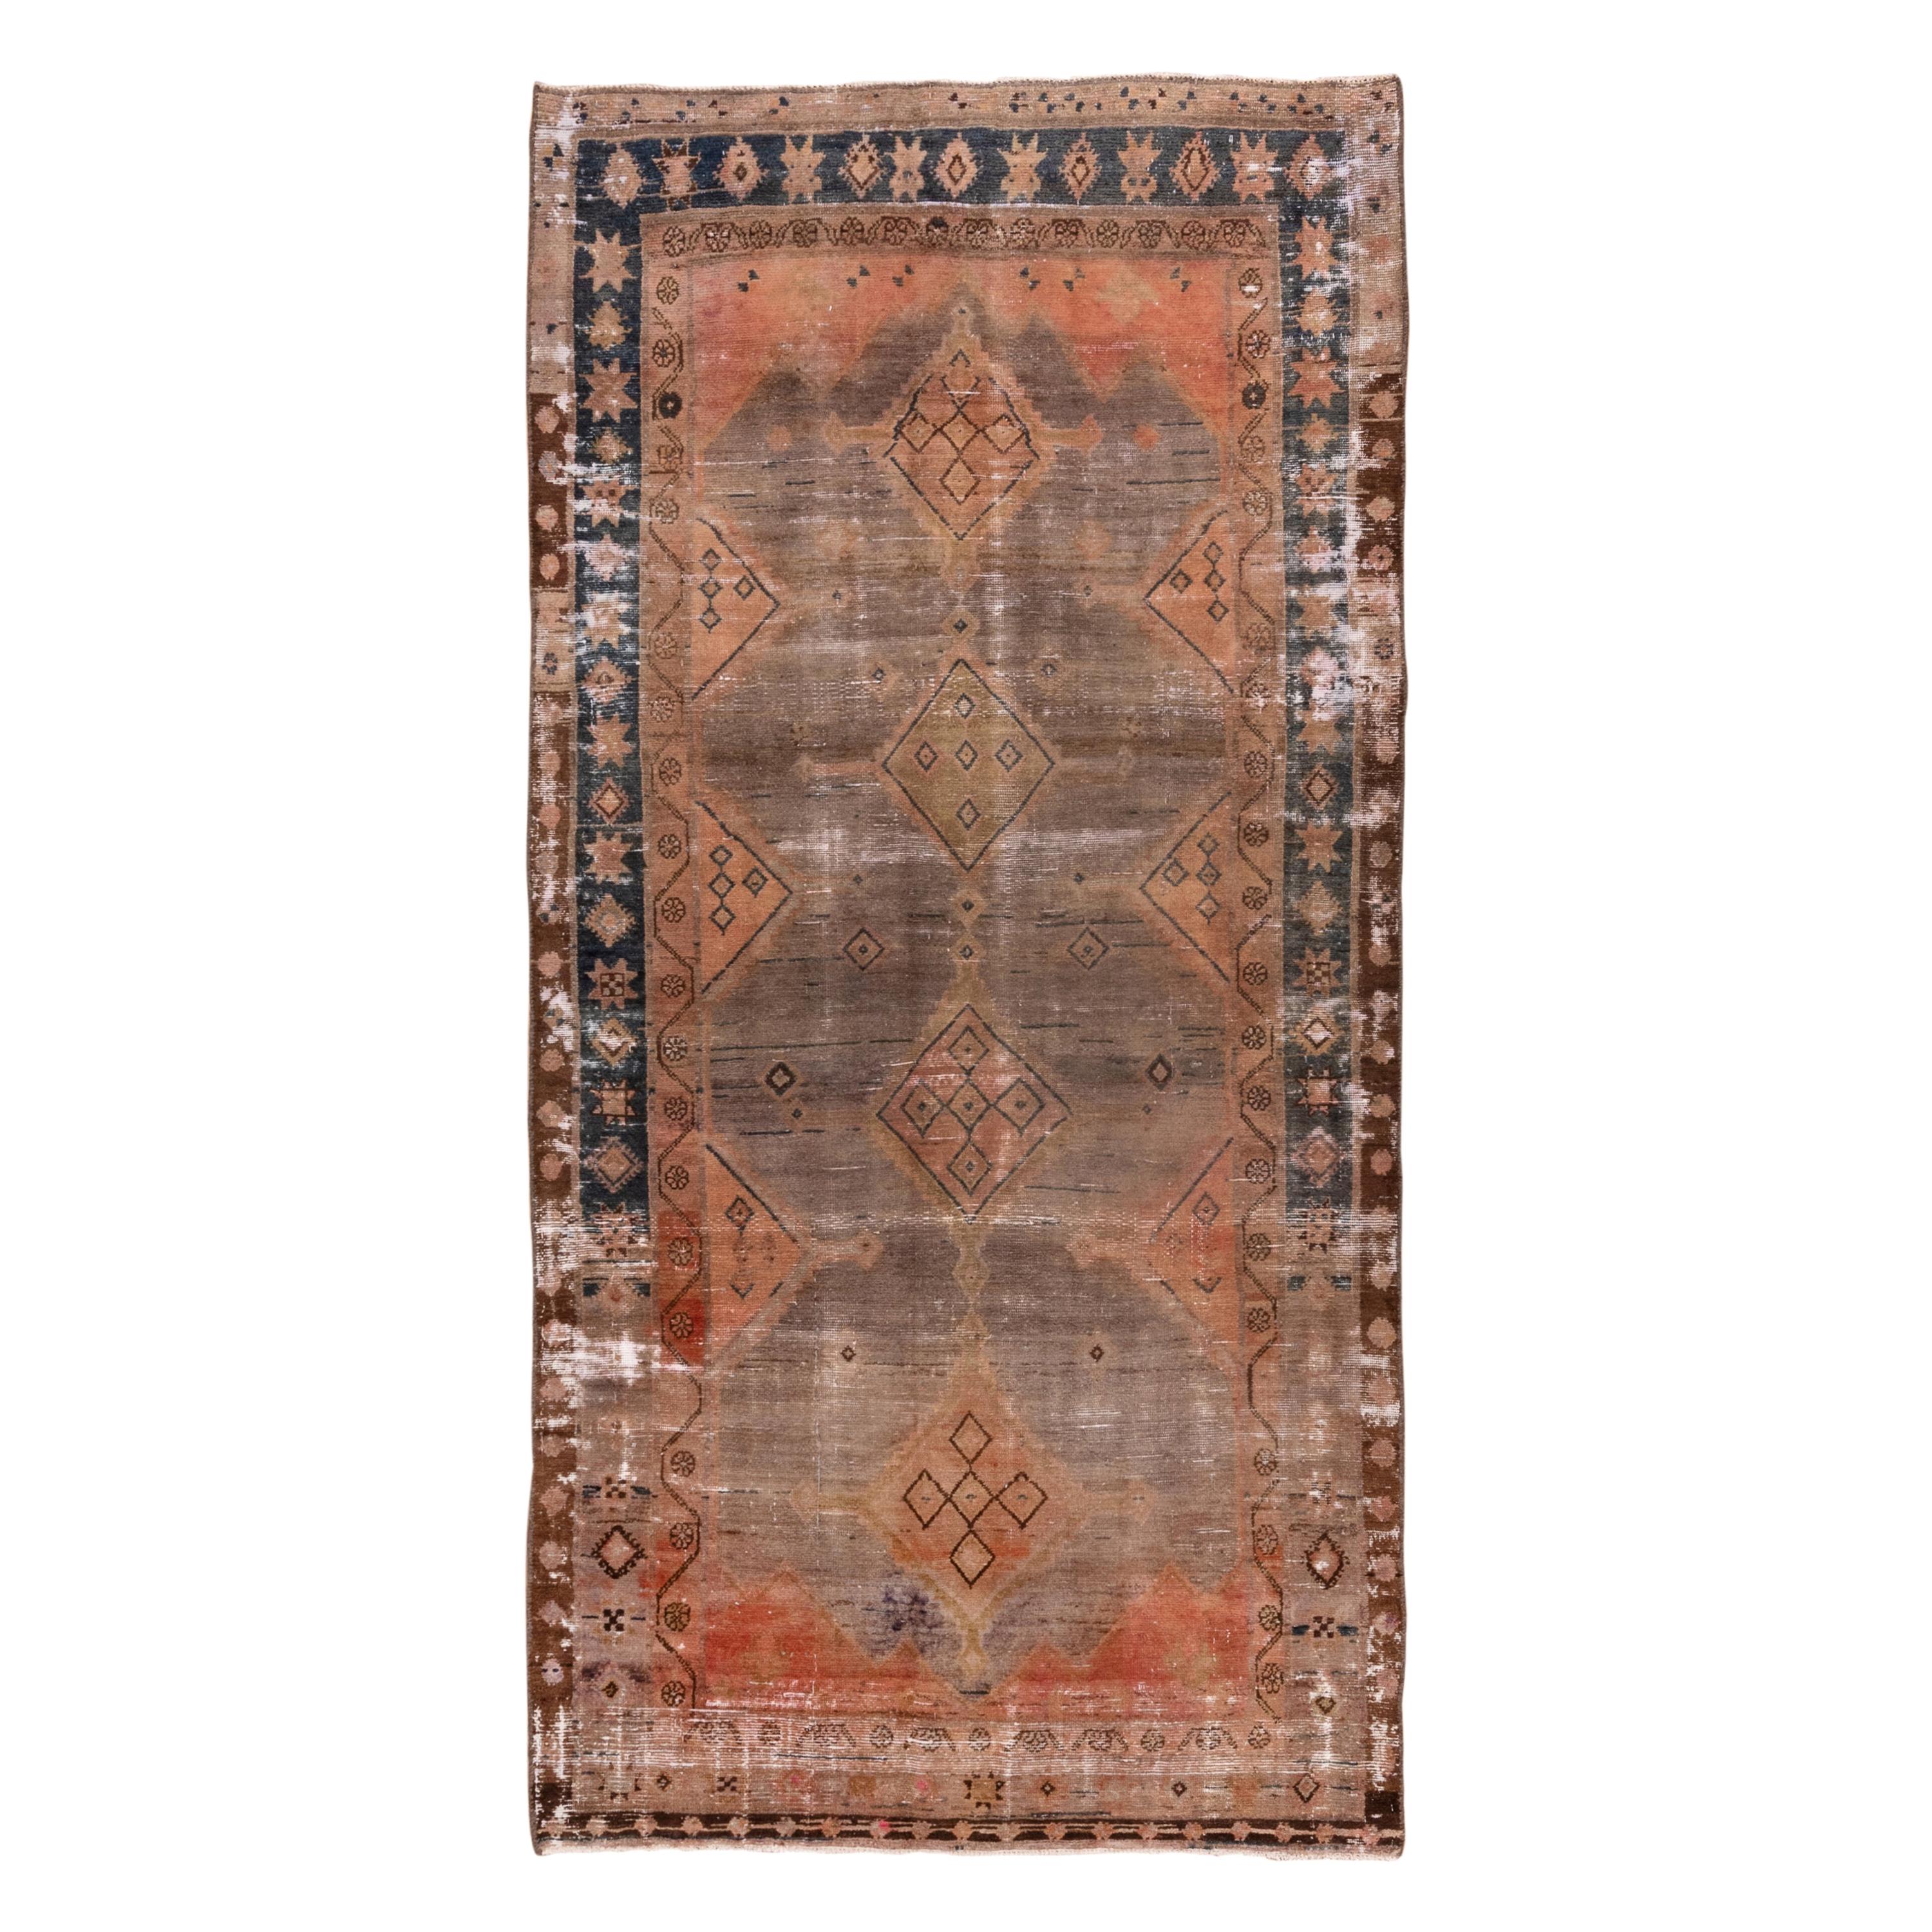 Vintage Distressed Long Tribal Rug, Orange Field, Blue and Gray Border For Sale